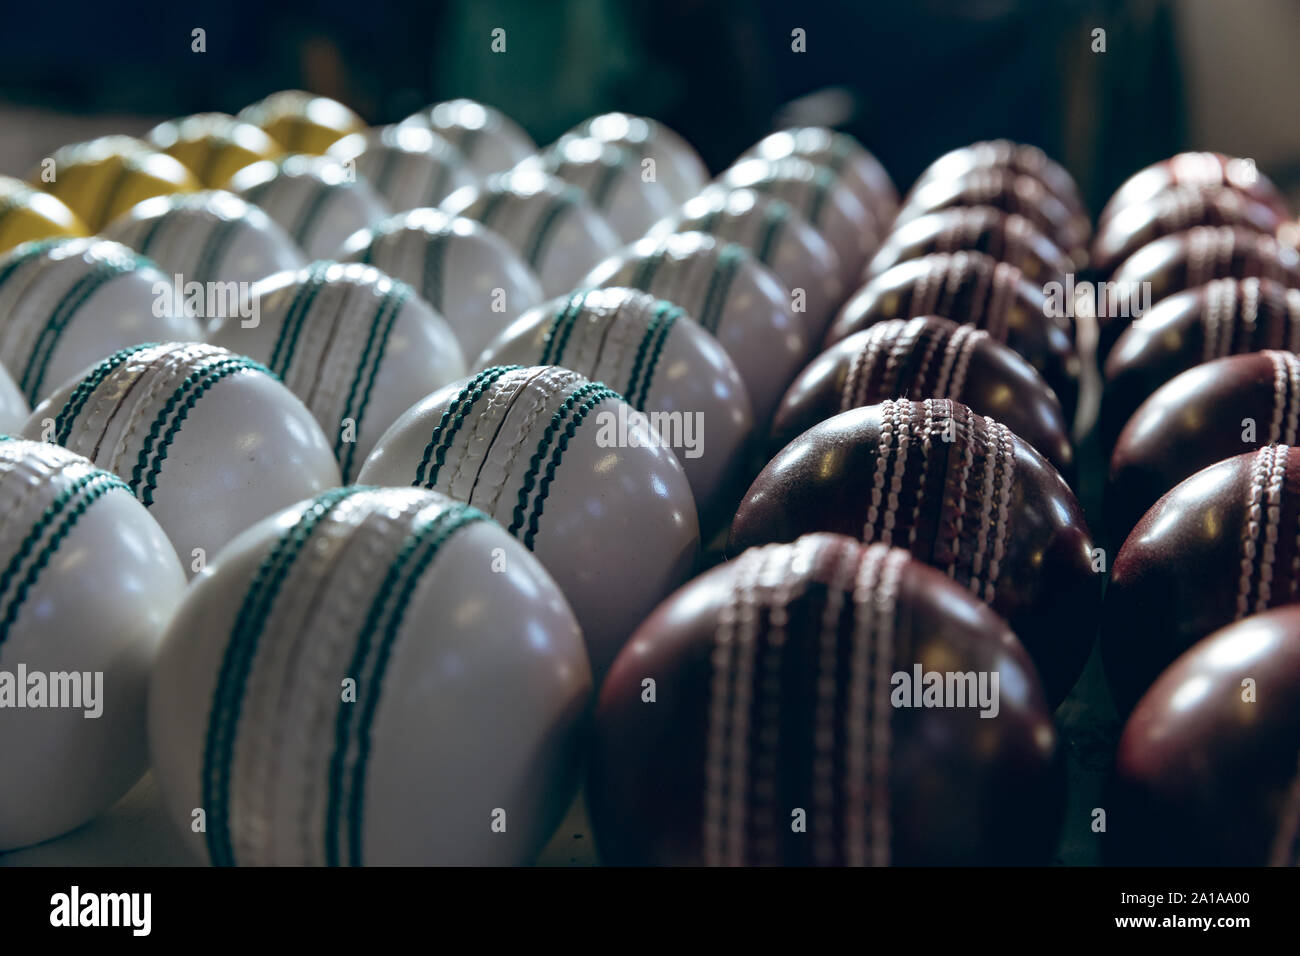 Red, white and yellow cricket balls in rows Stock Photo